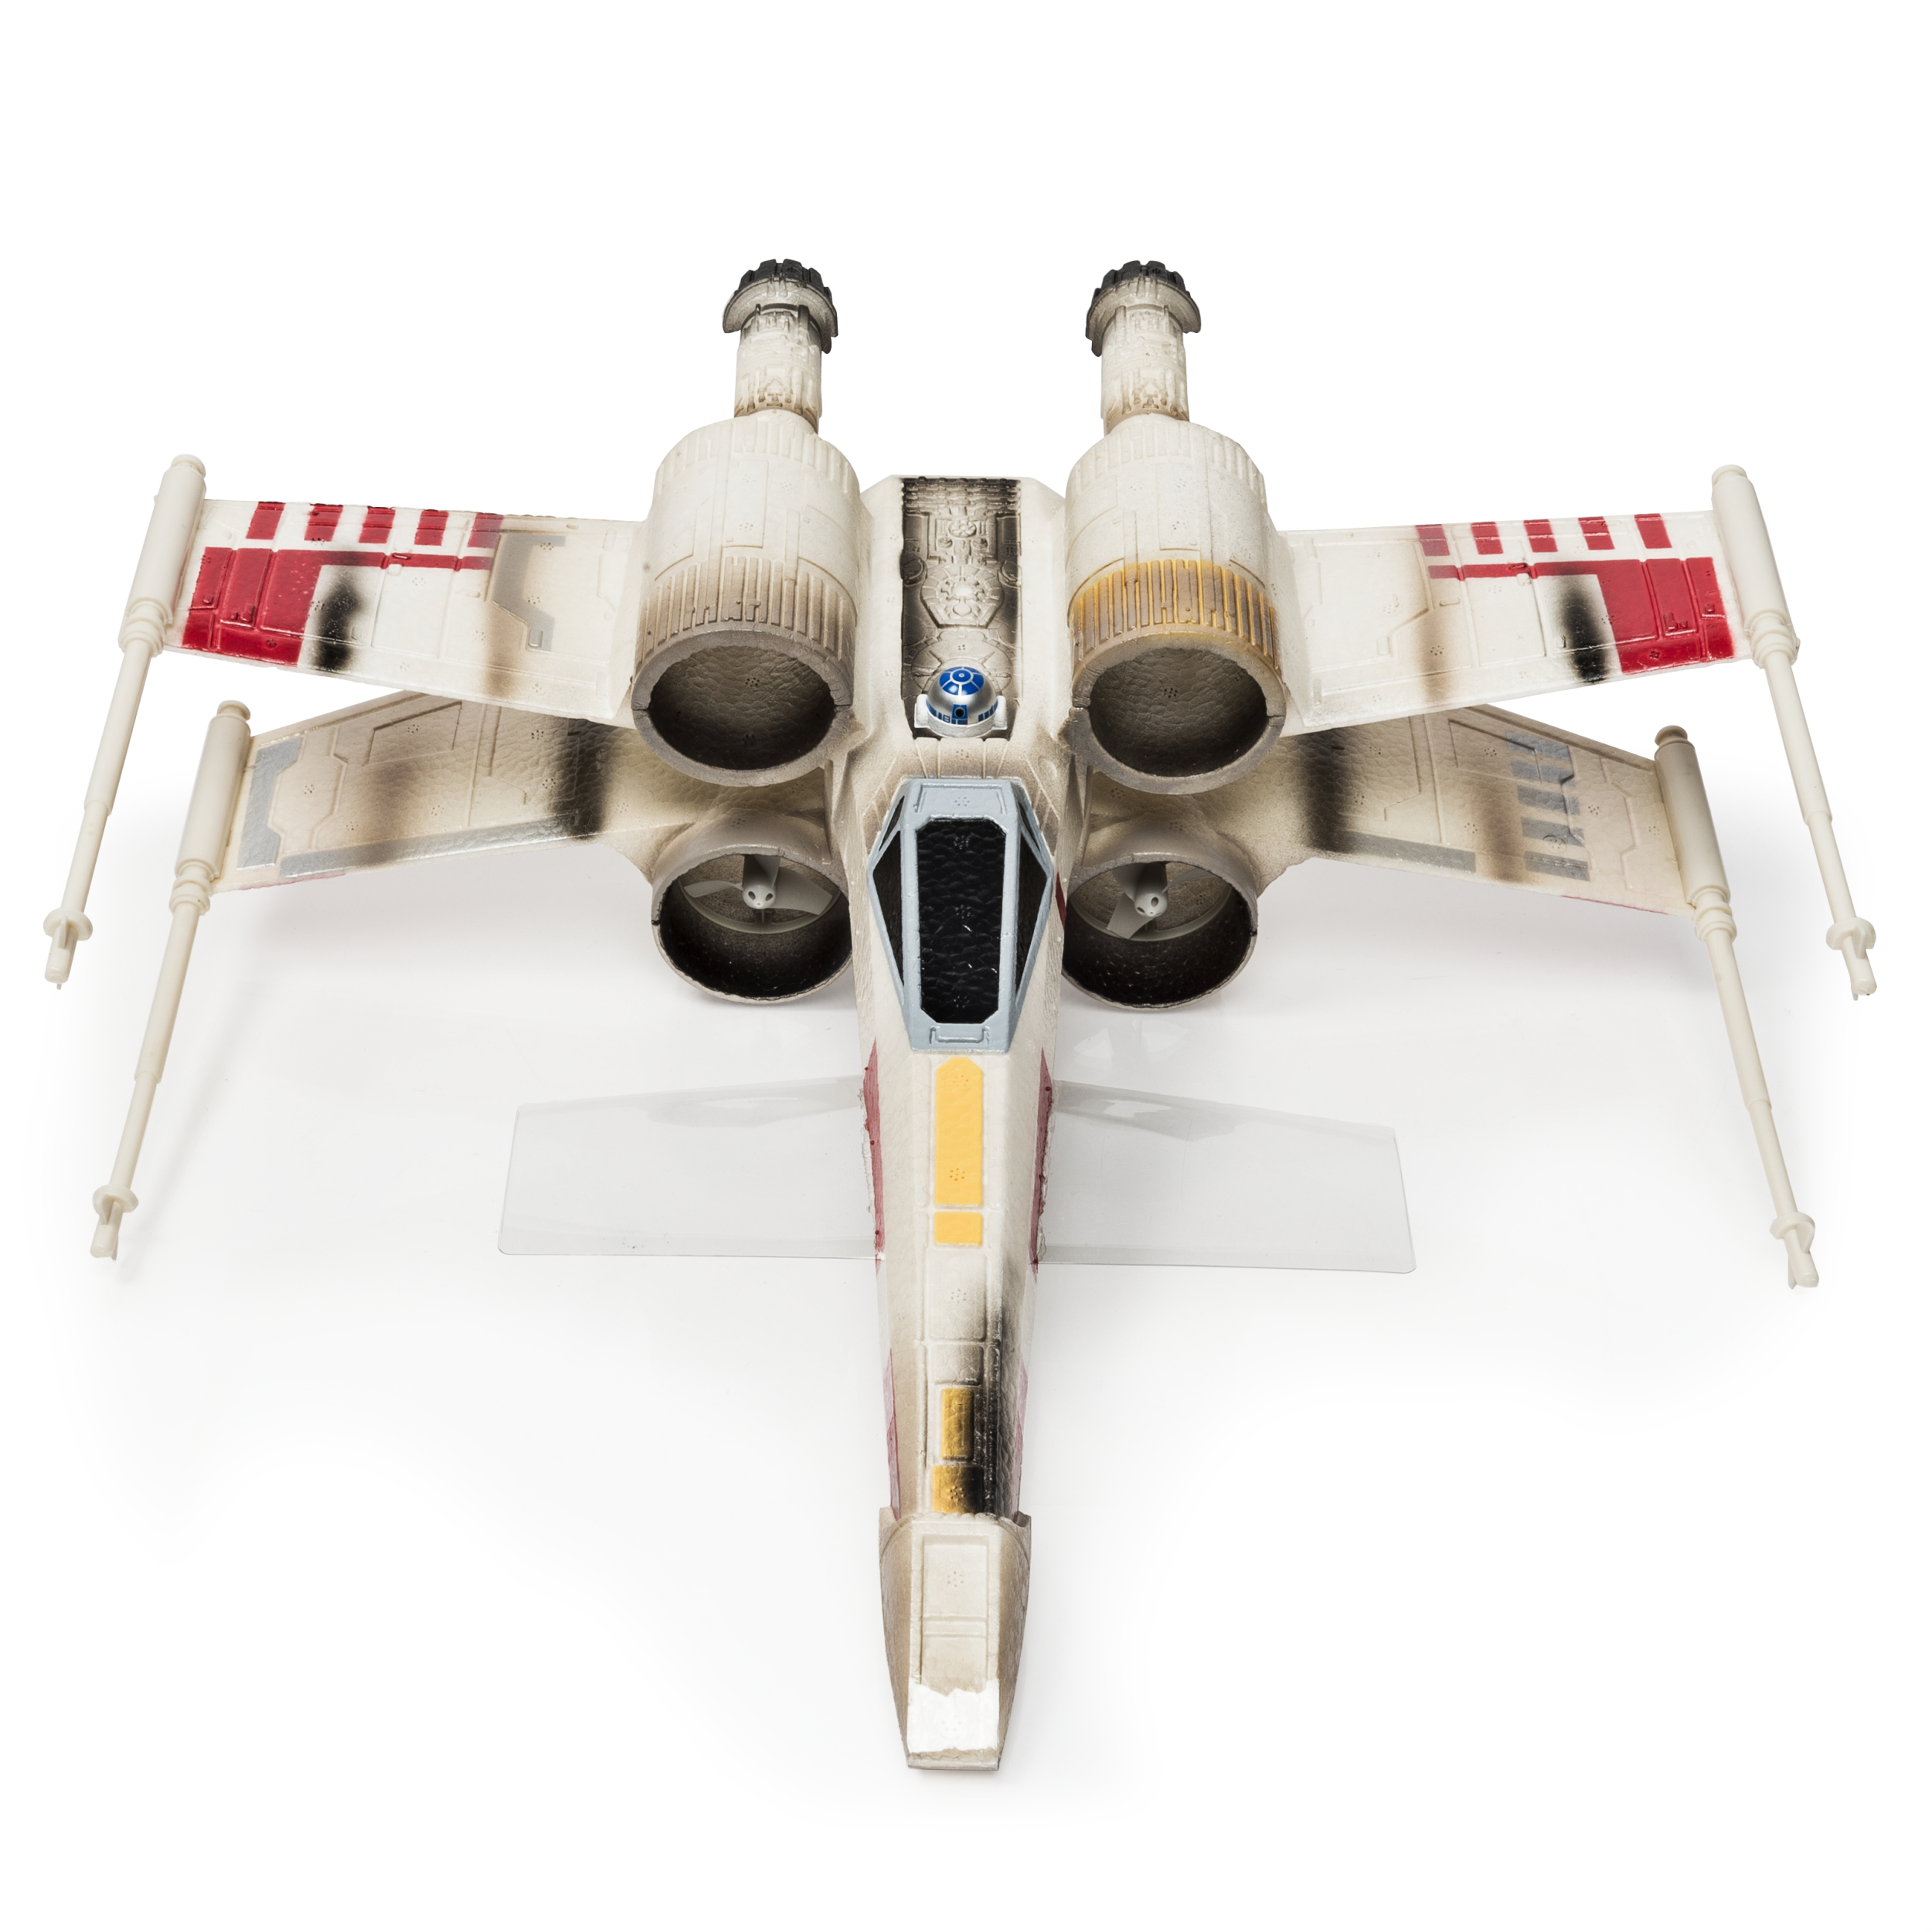 Air Hogs Star Wars Remote Control X-Wing Starfighter - image 5 of 6